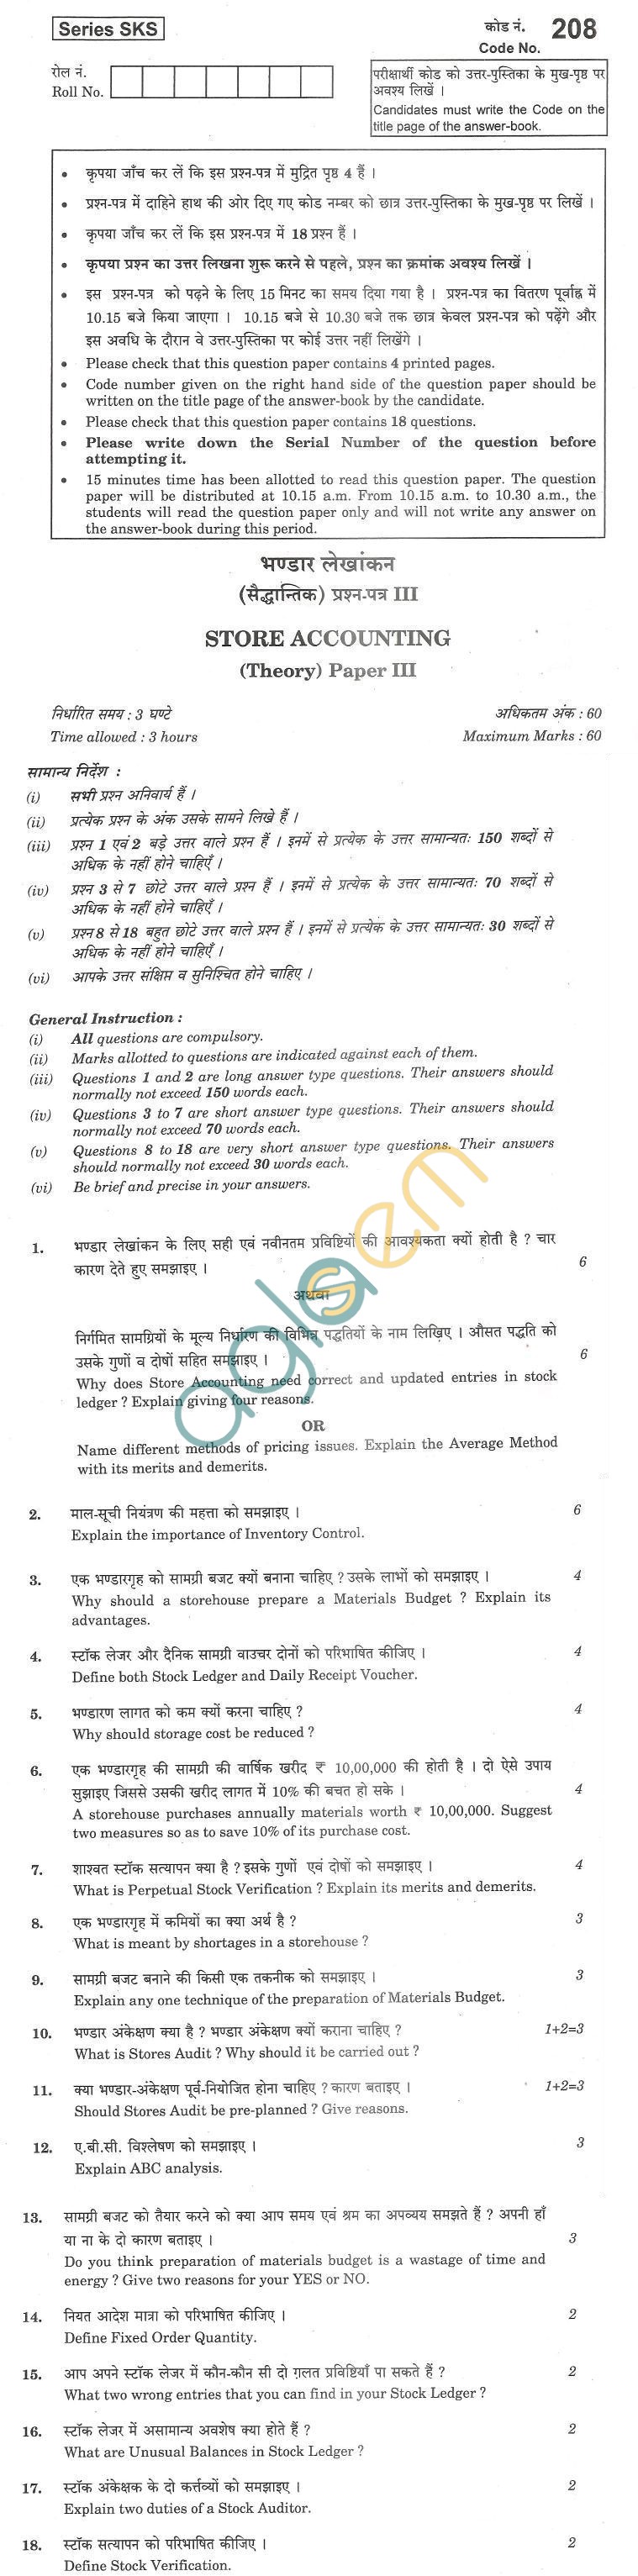 CBSE Board Exam 2013 Class XII Question Paper - Store Accounting